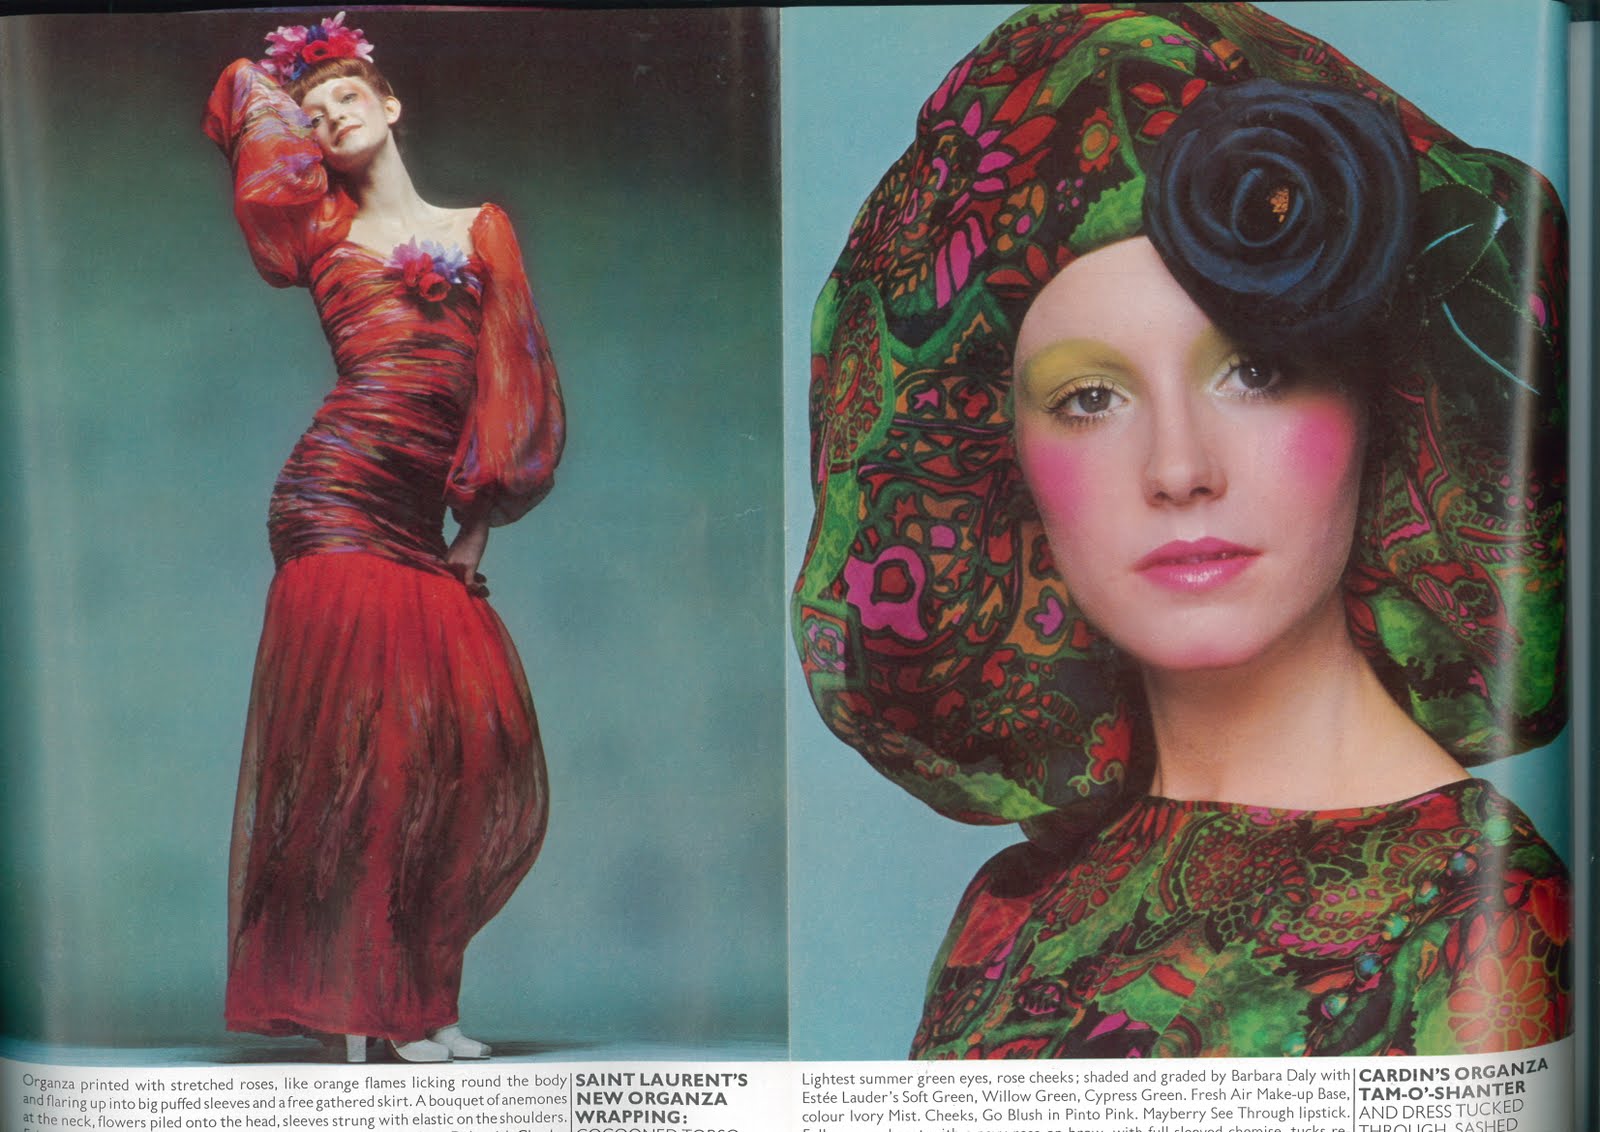 youthquakers: 1st March 1971 - UK Vogue